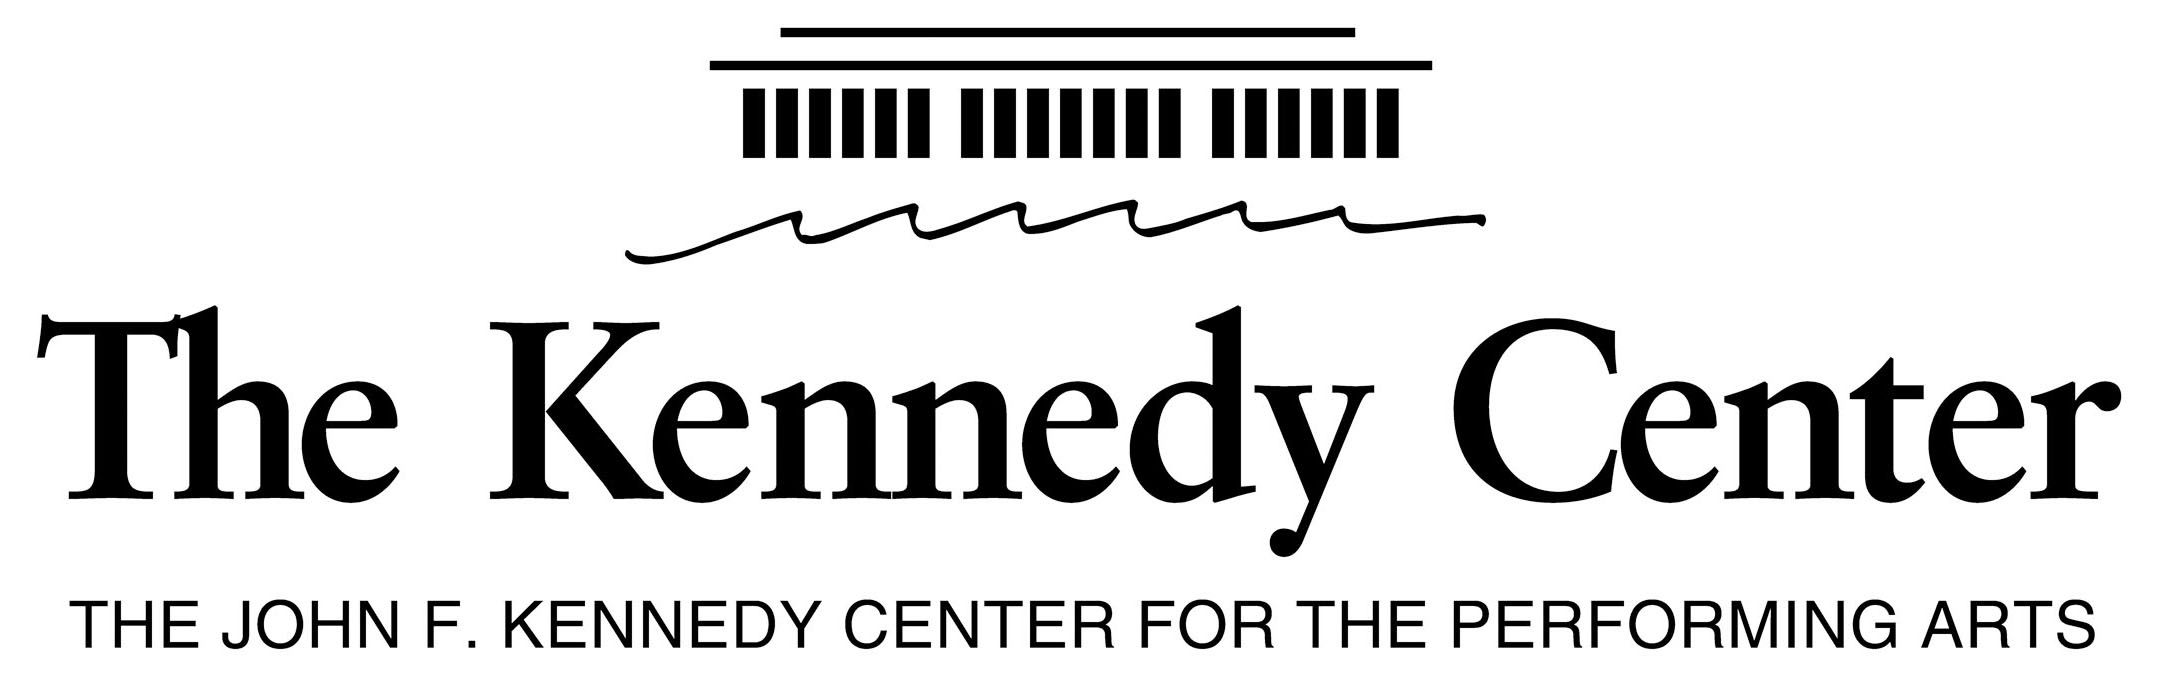 John-F.-Kennedy-Center-for-the-Performing-Arts